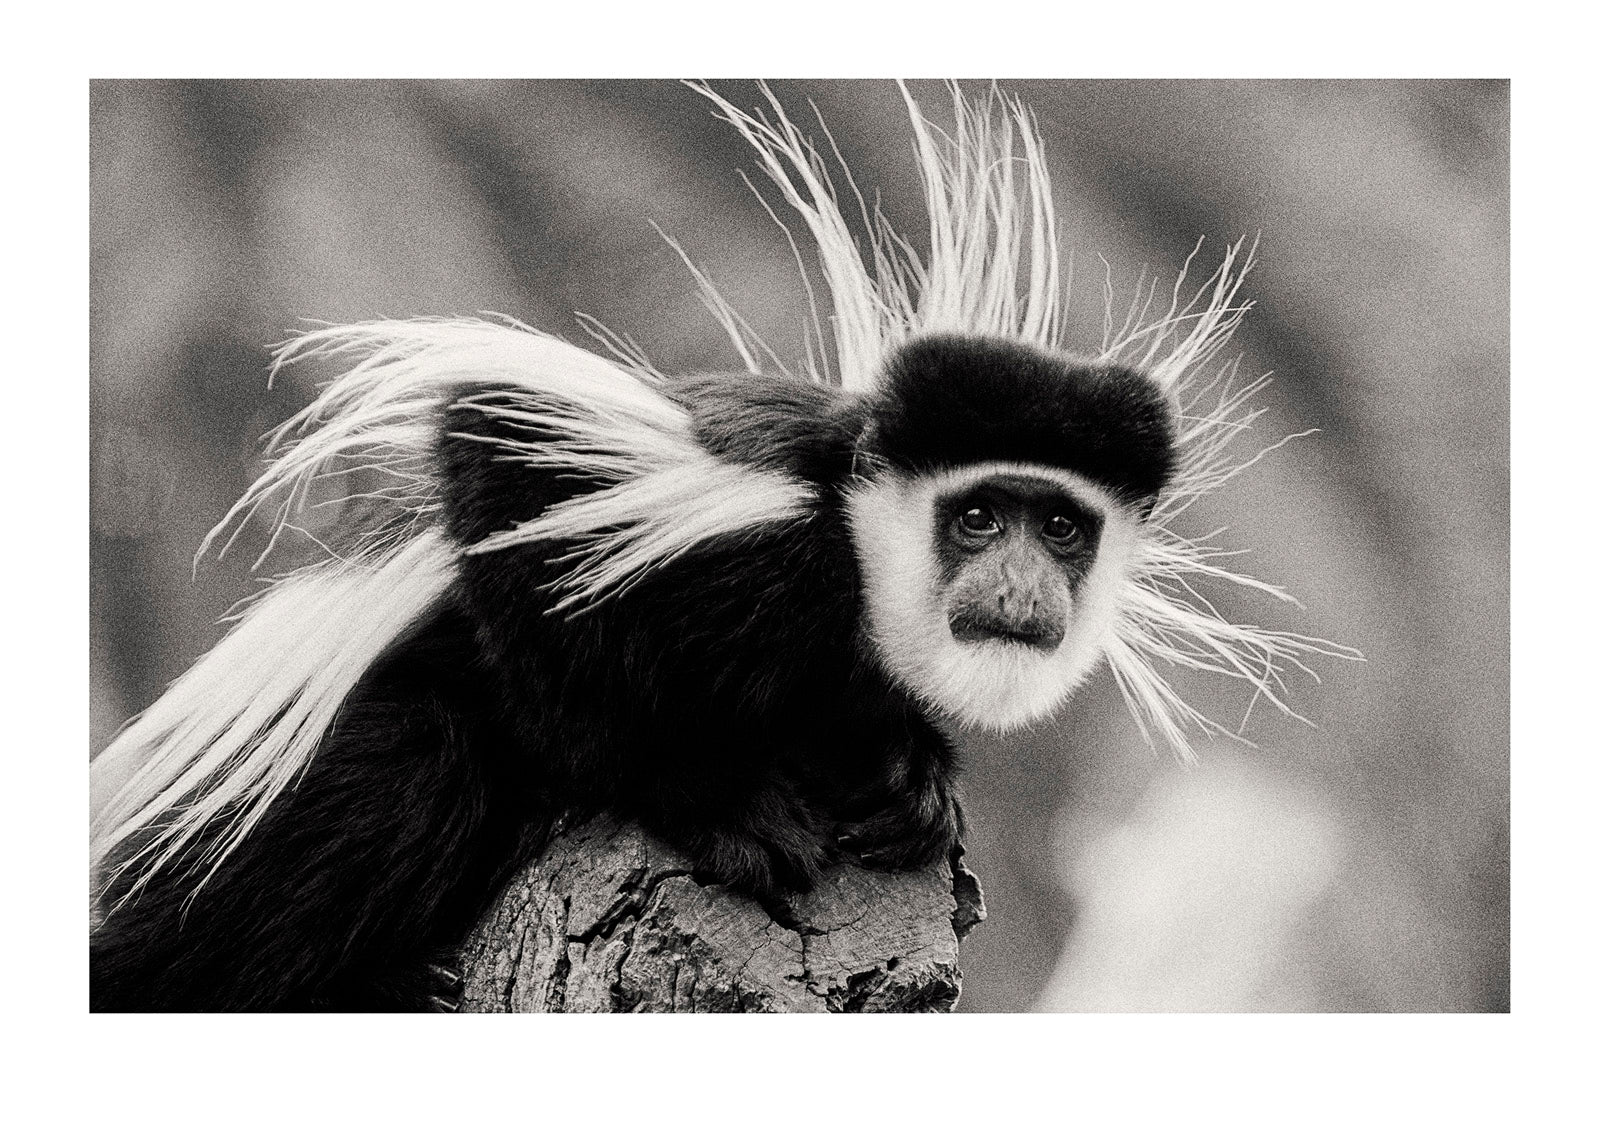 The magnificent mane of the Black and White Colobus. Captured on Ilford HP5 black and white negative film. Zoological Board of Victoria, Victoria, Australia.